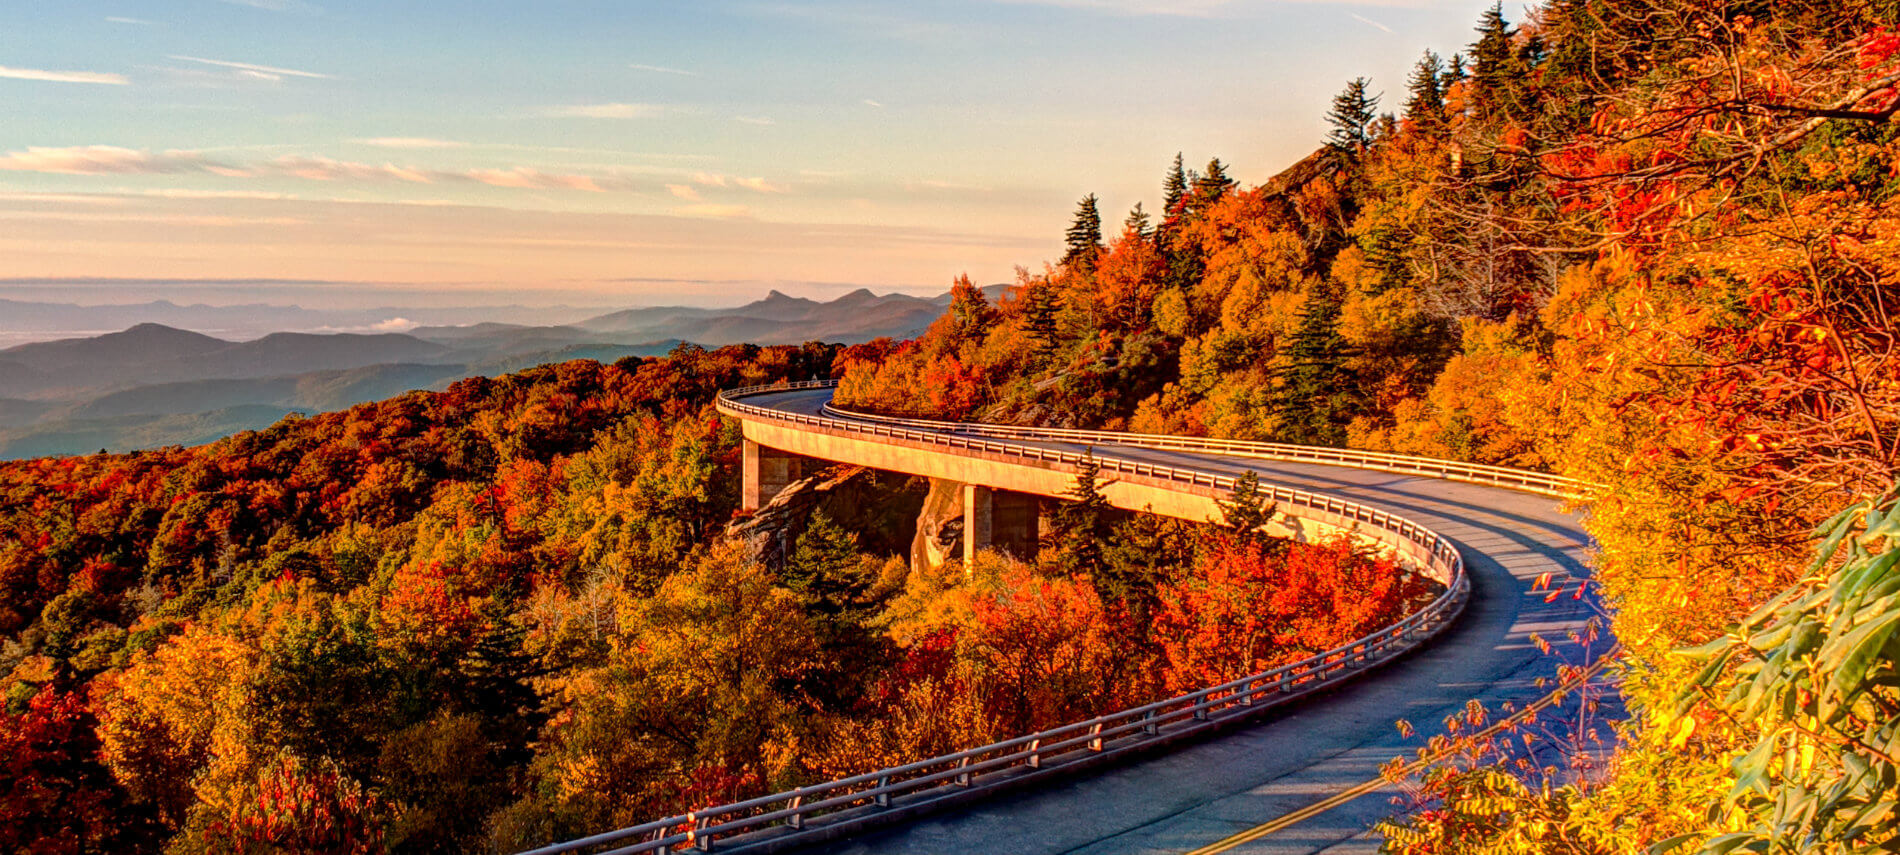 View of the Blue Ridge parkway. Vibrant colors are on the trees.. green, ted, orange, yellow. Mountains seem to go on for miles..